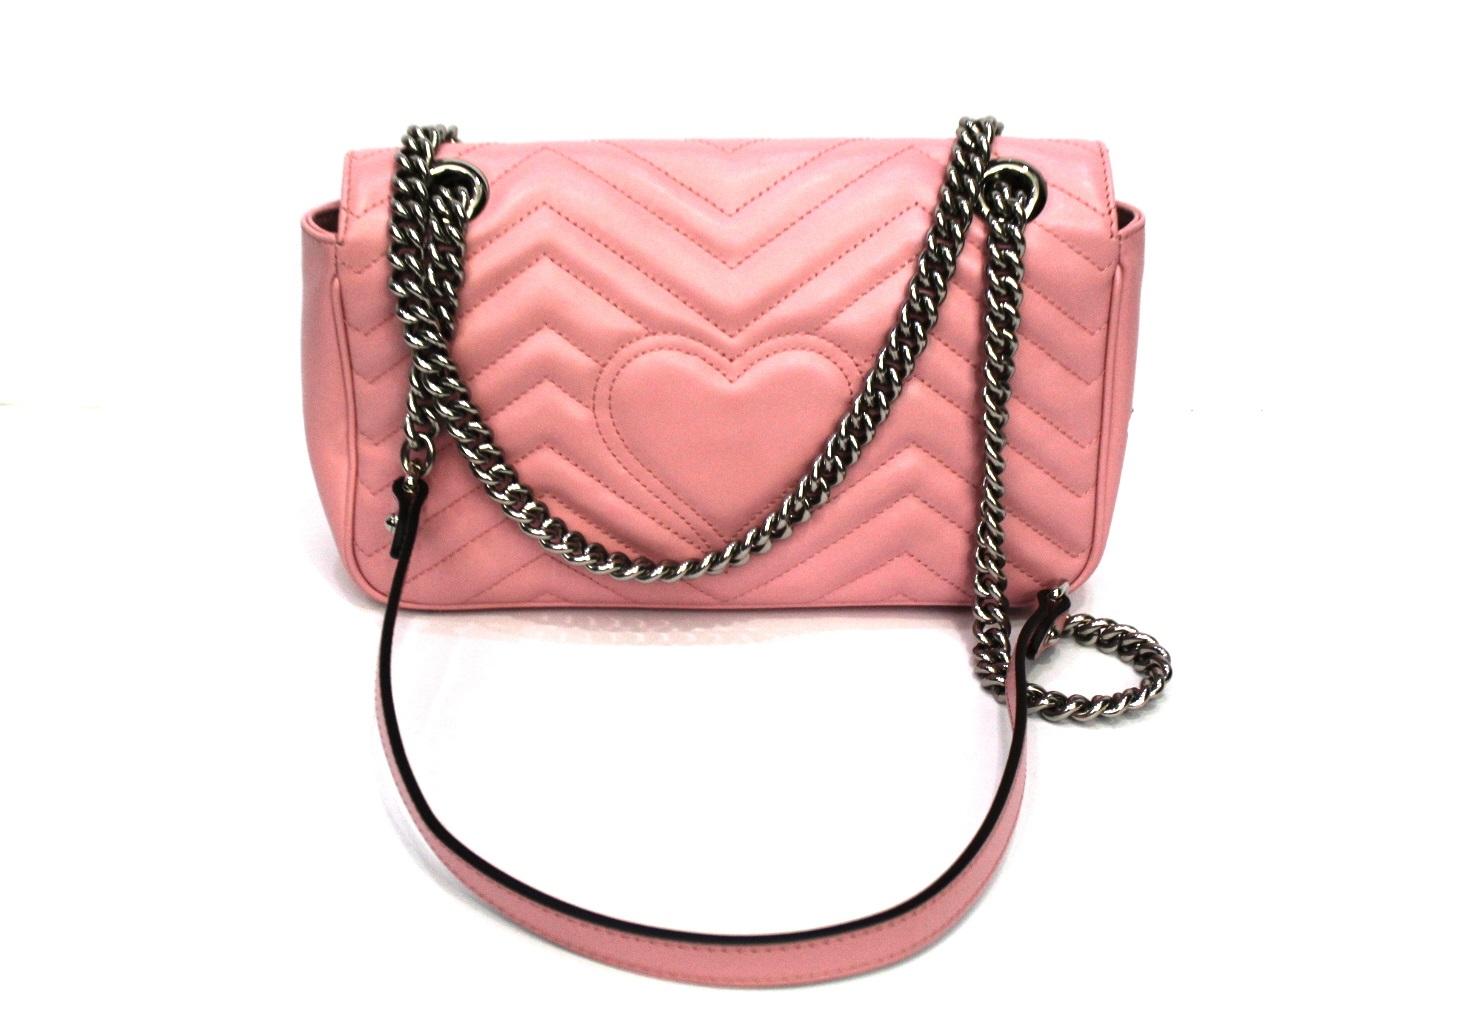 The very current Gucci Marmont bag measures 26 cm made of pink leather with silver hardware. closure with classic GG logo, quite large inside. Equipped with leather shoulder strap and adjustable chain. The bag is in excellent condition, equipped